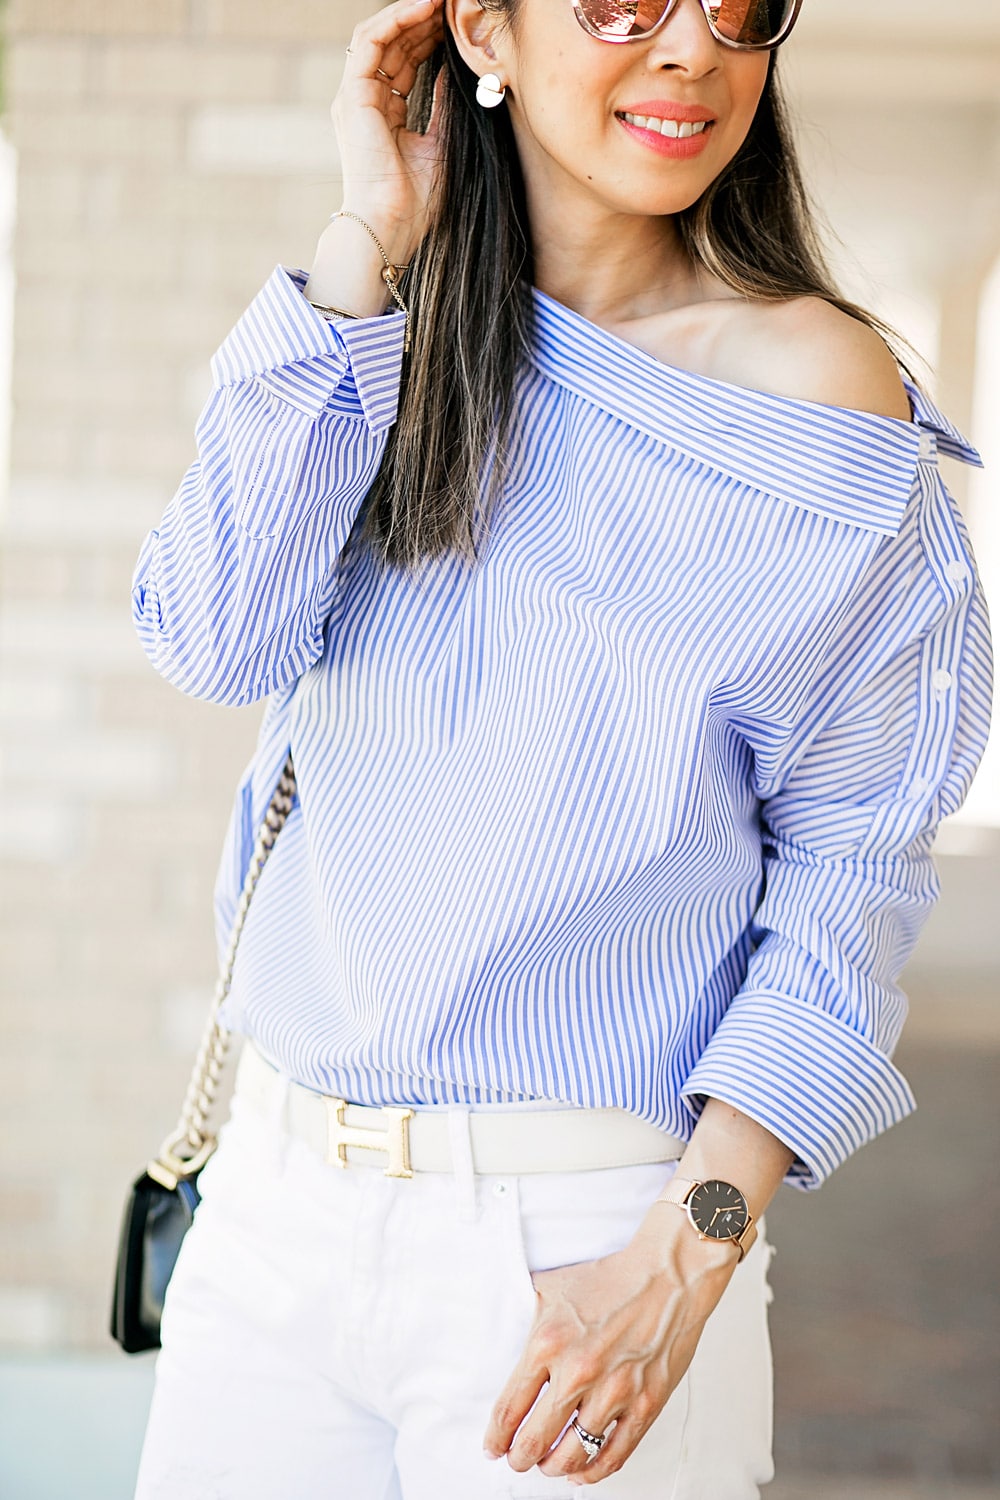 who what wear one shoulder button top with white boyfriend jeans, hermes belt and daniel wellington classic petite rose gold watch